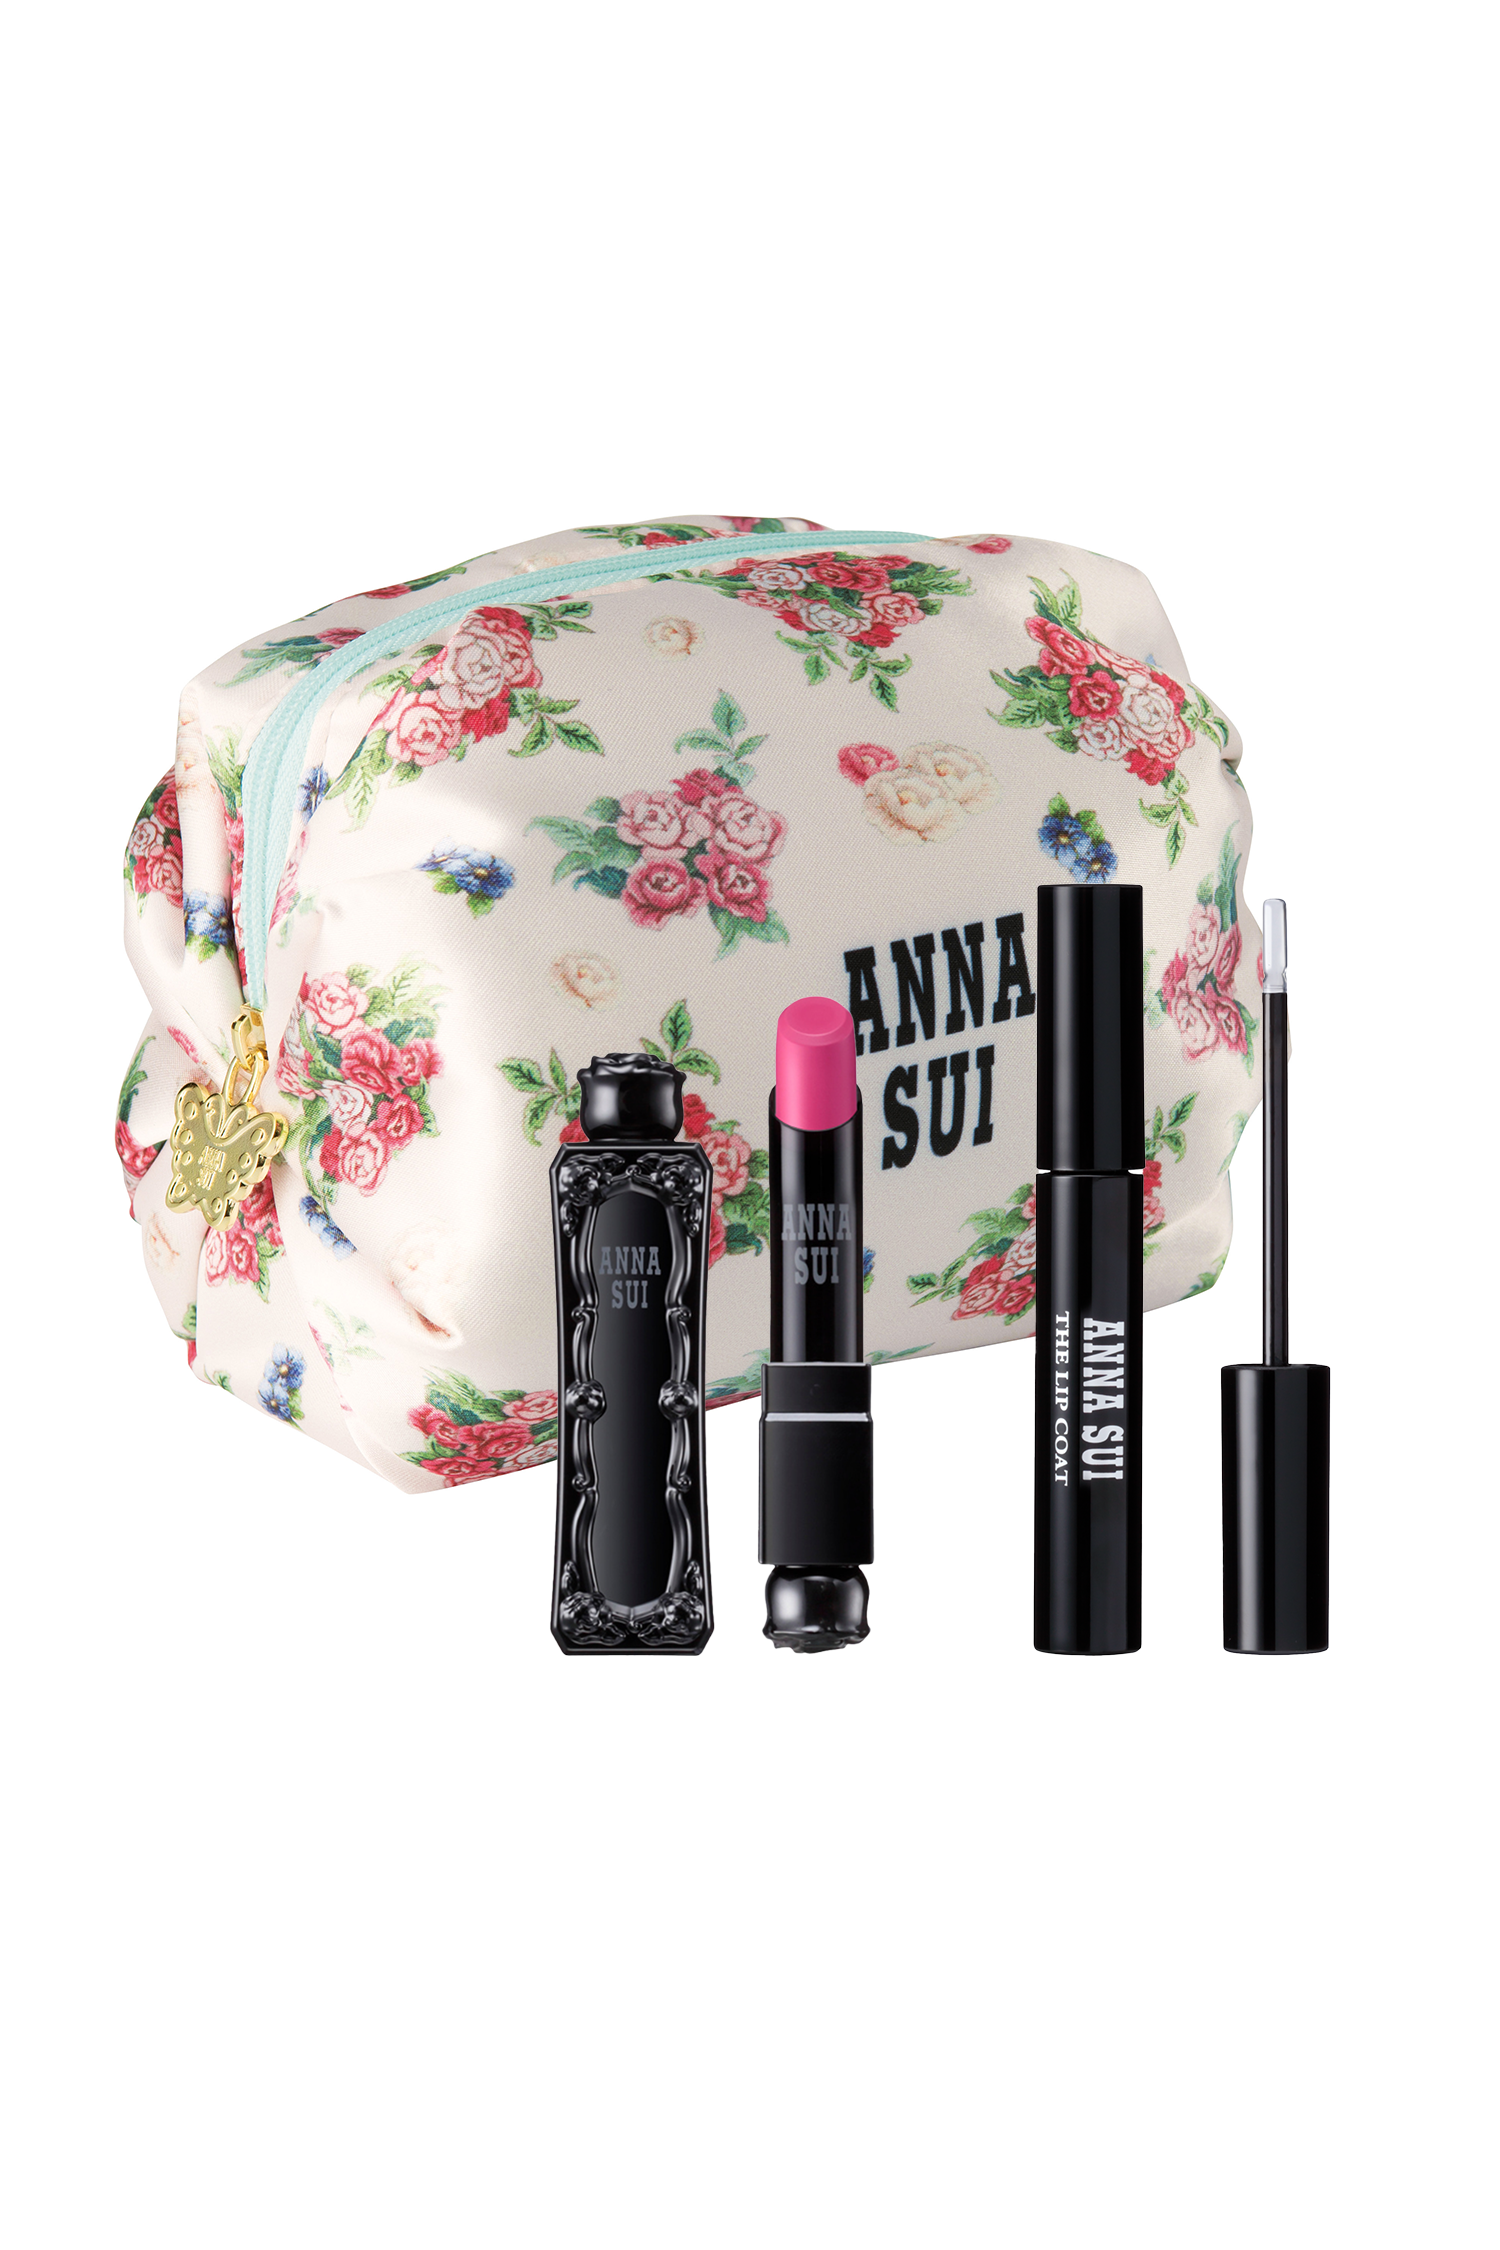 Cosmetic Bag set, beige & floral design, lipstick HOT PINK, & lip coat in black containers